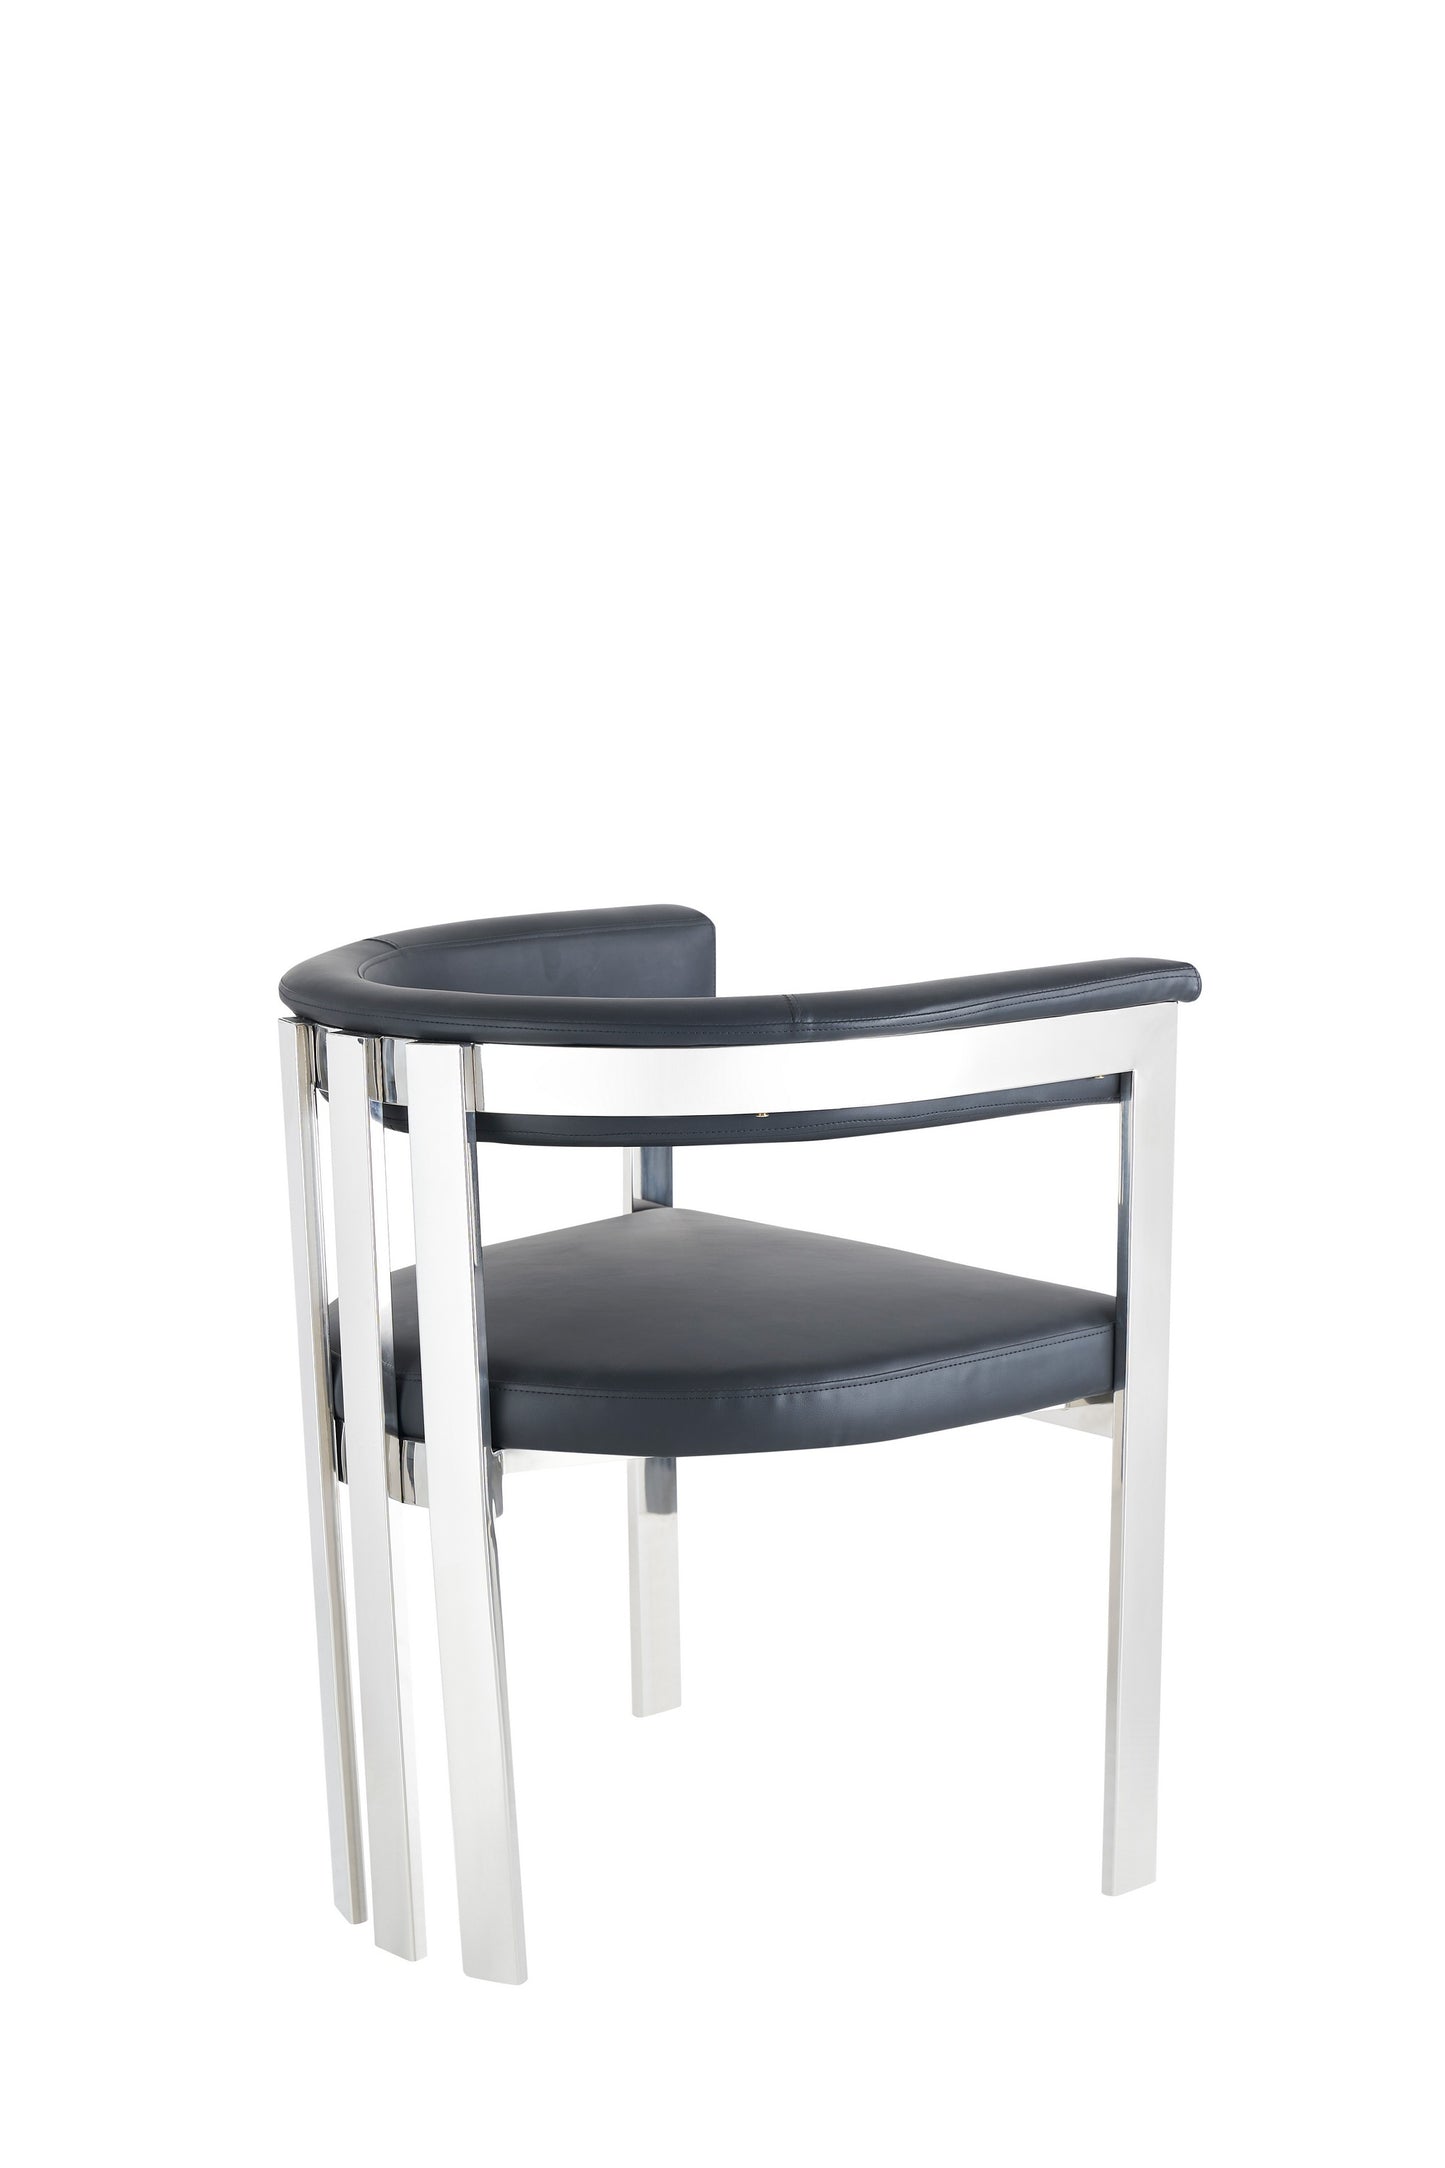 Modrest Pontiac - Modern Black Vegan Leather and Stainless Steel Dining Chair